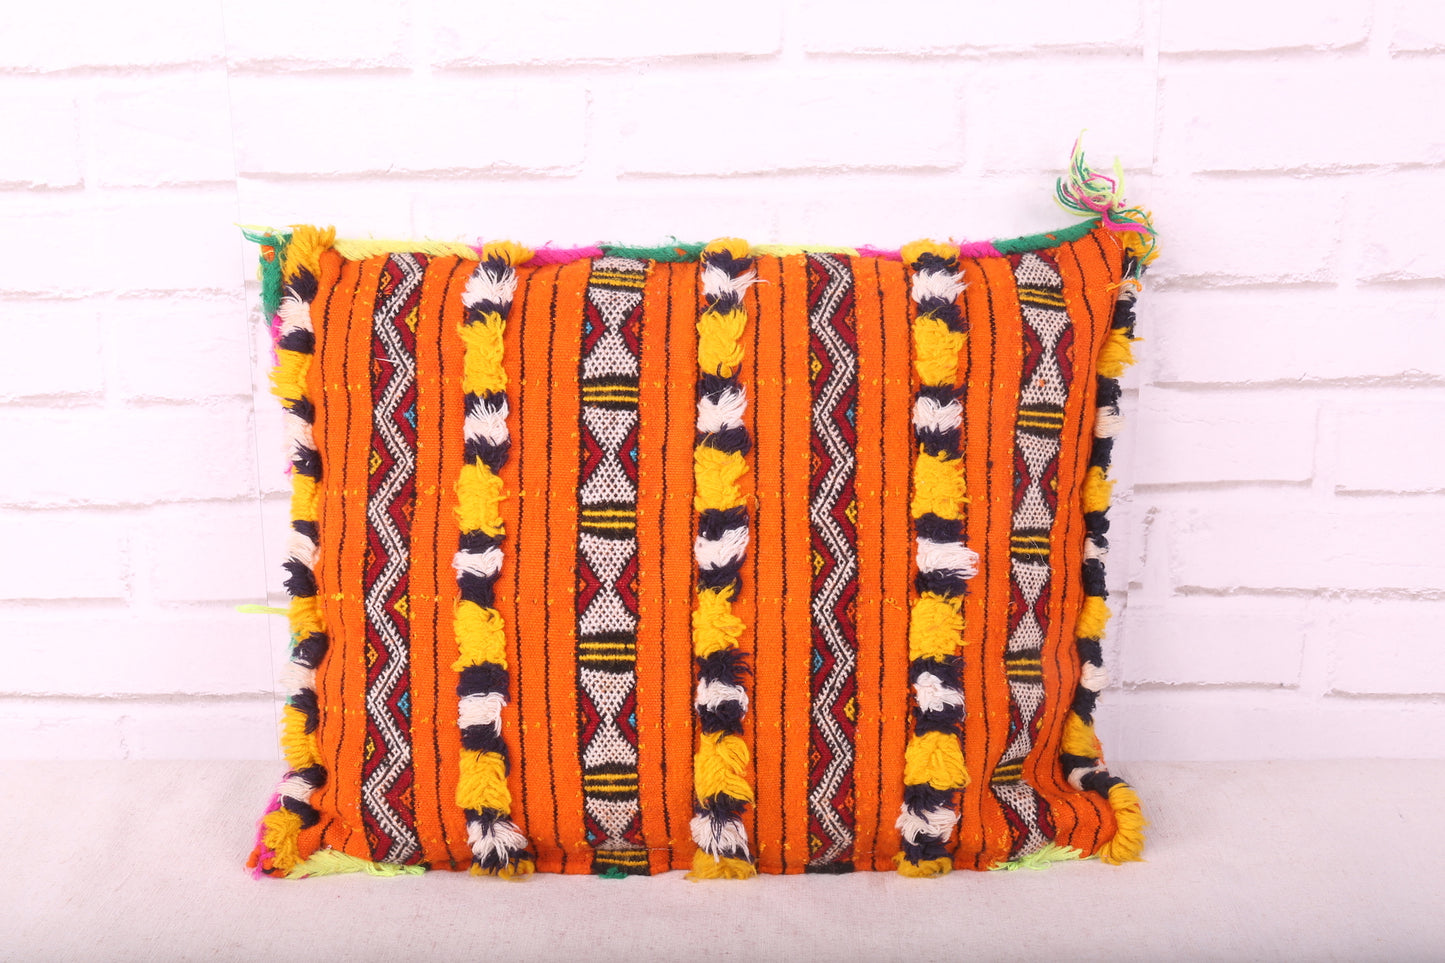 Filled Berber pillow 15.3 inches X 19.2 inches